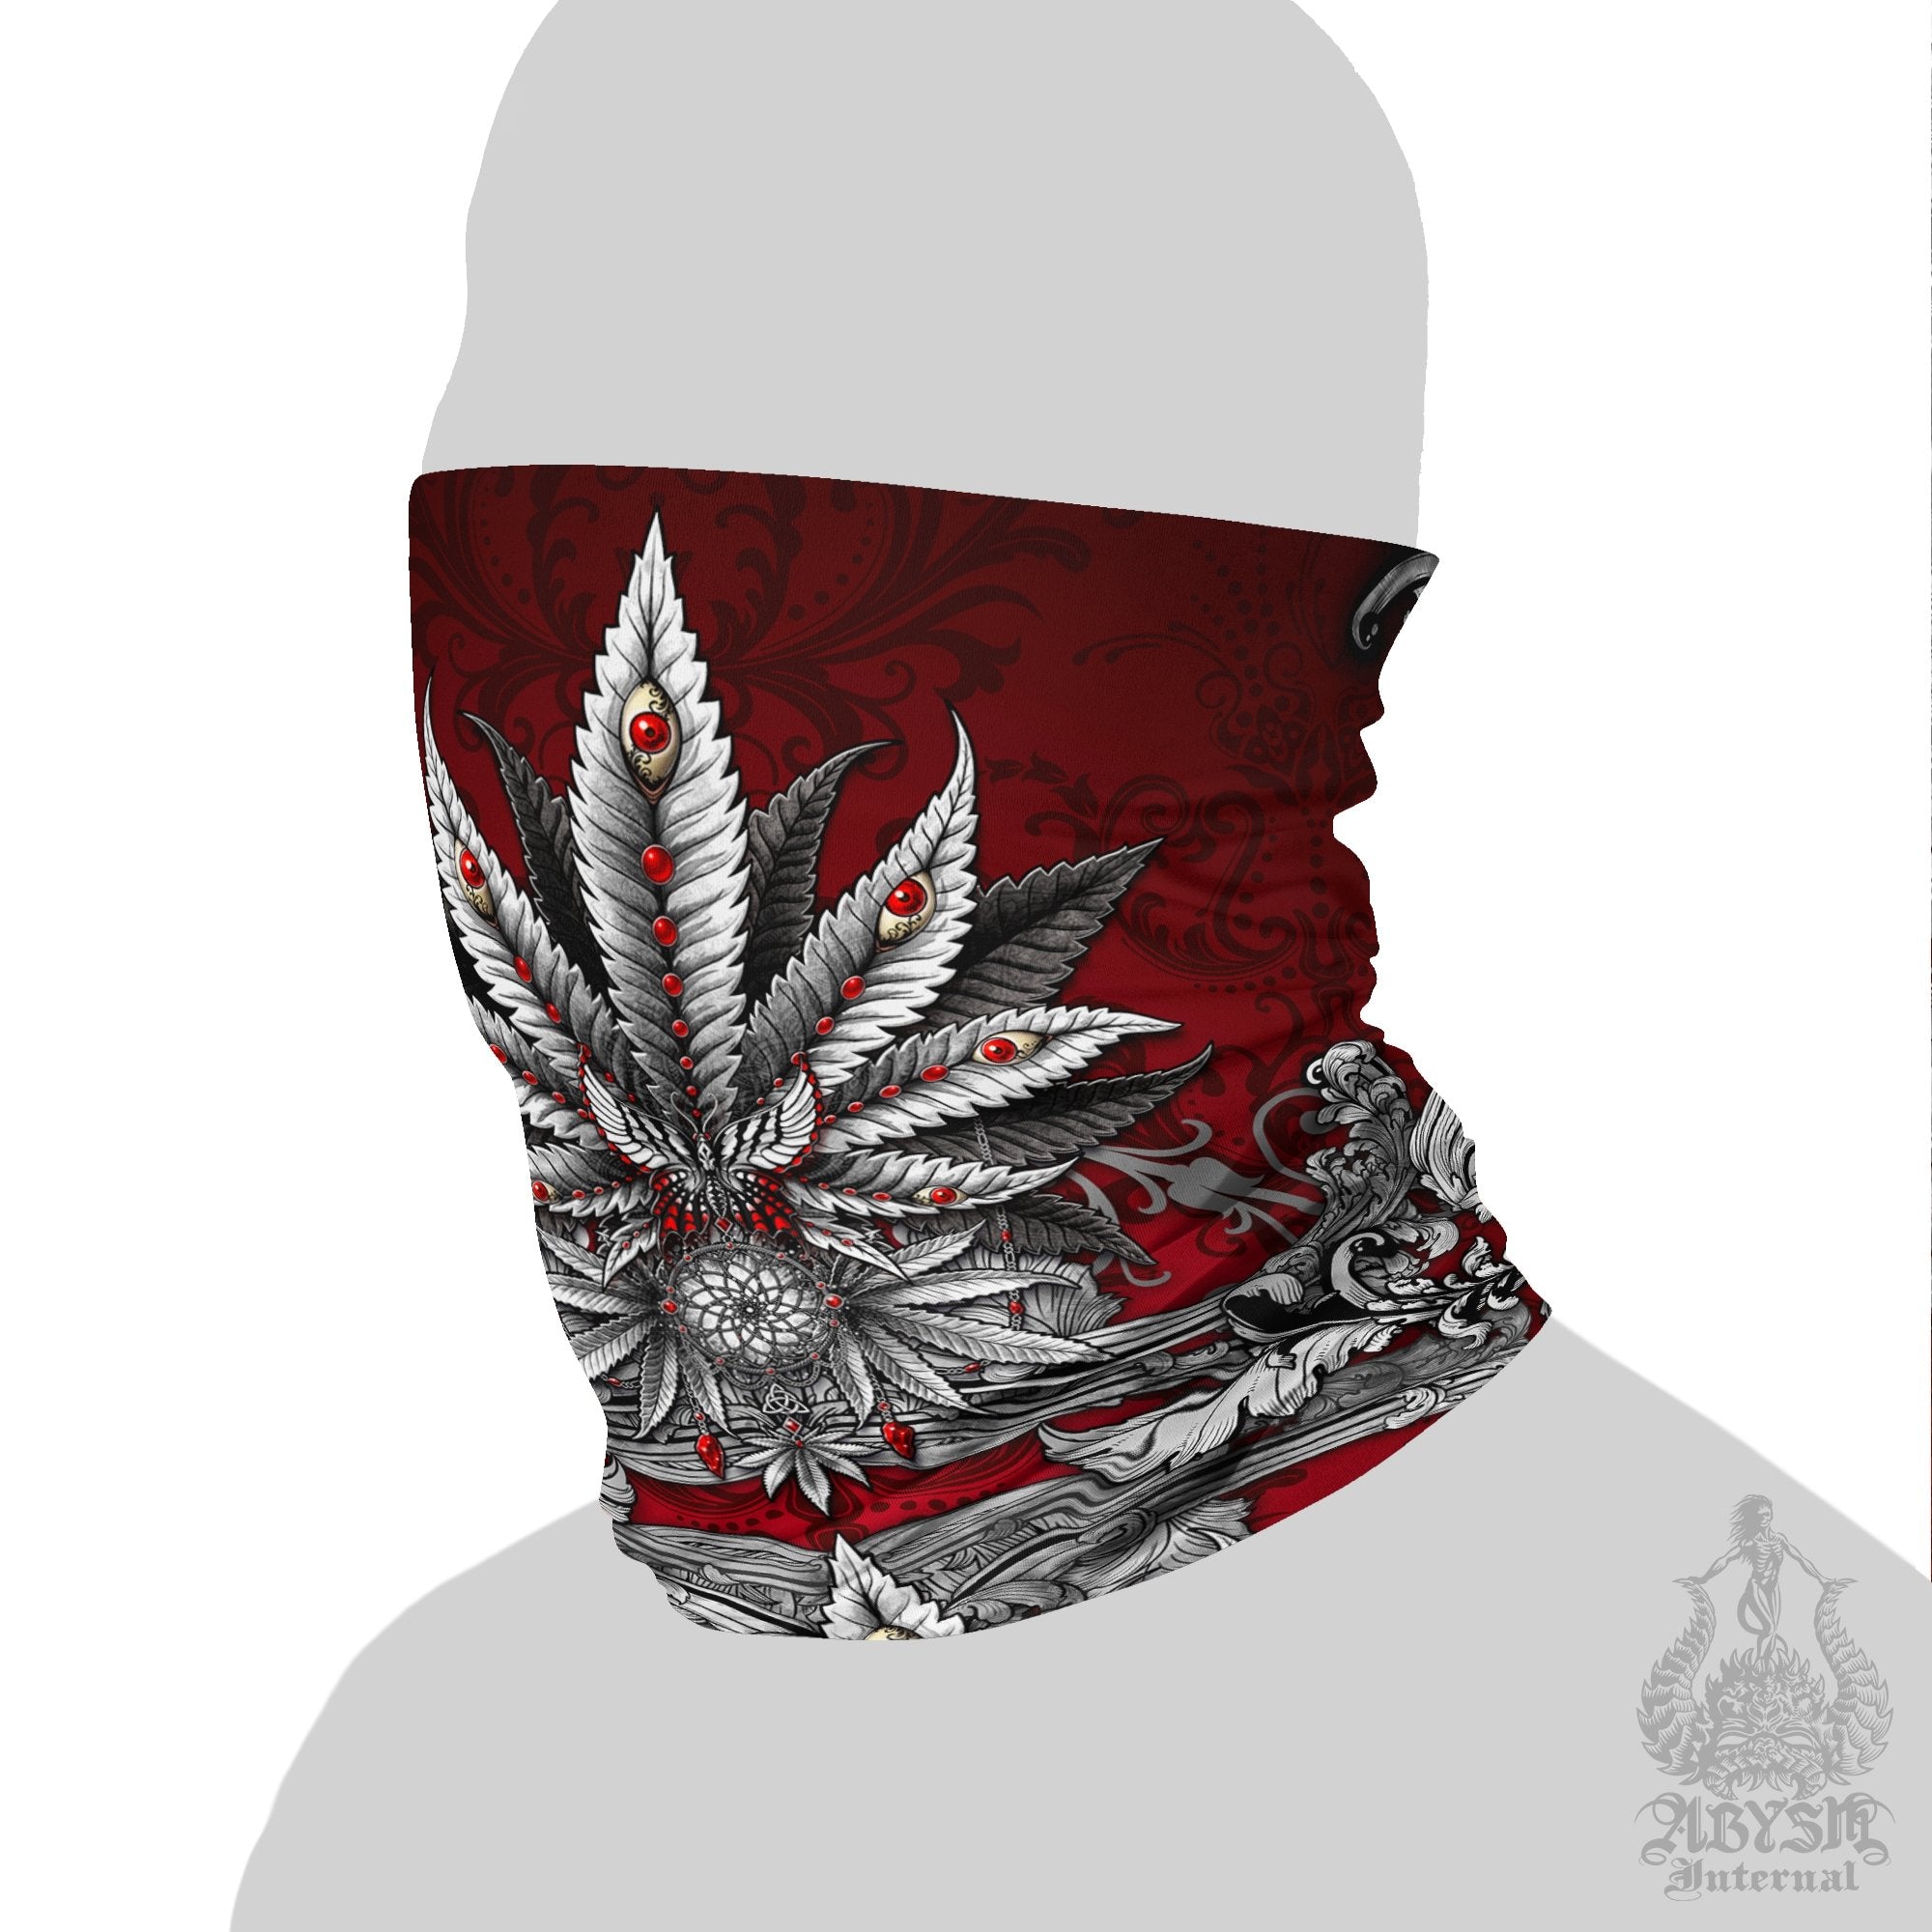 Silver Cannabis Neck Gaiter, Weed Face Mask, Marijuana Head Covering, Outdoors Festival Outfit, 420 Gift - Abysm Internal